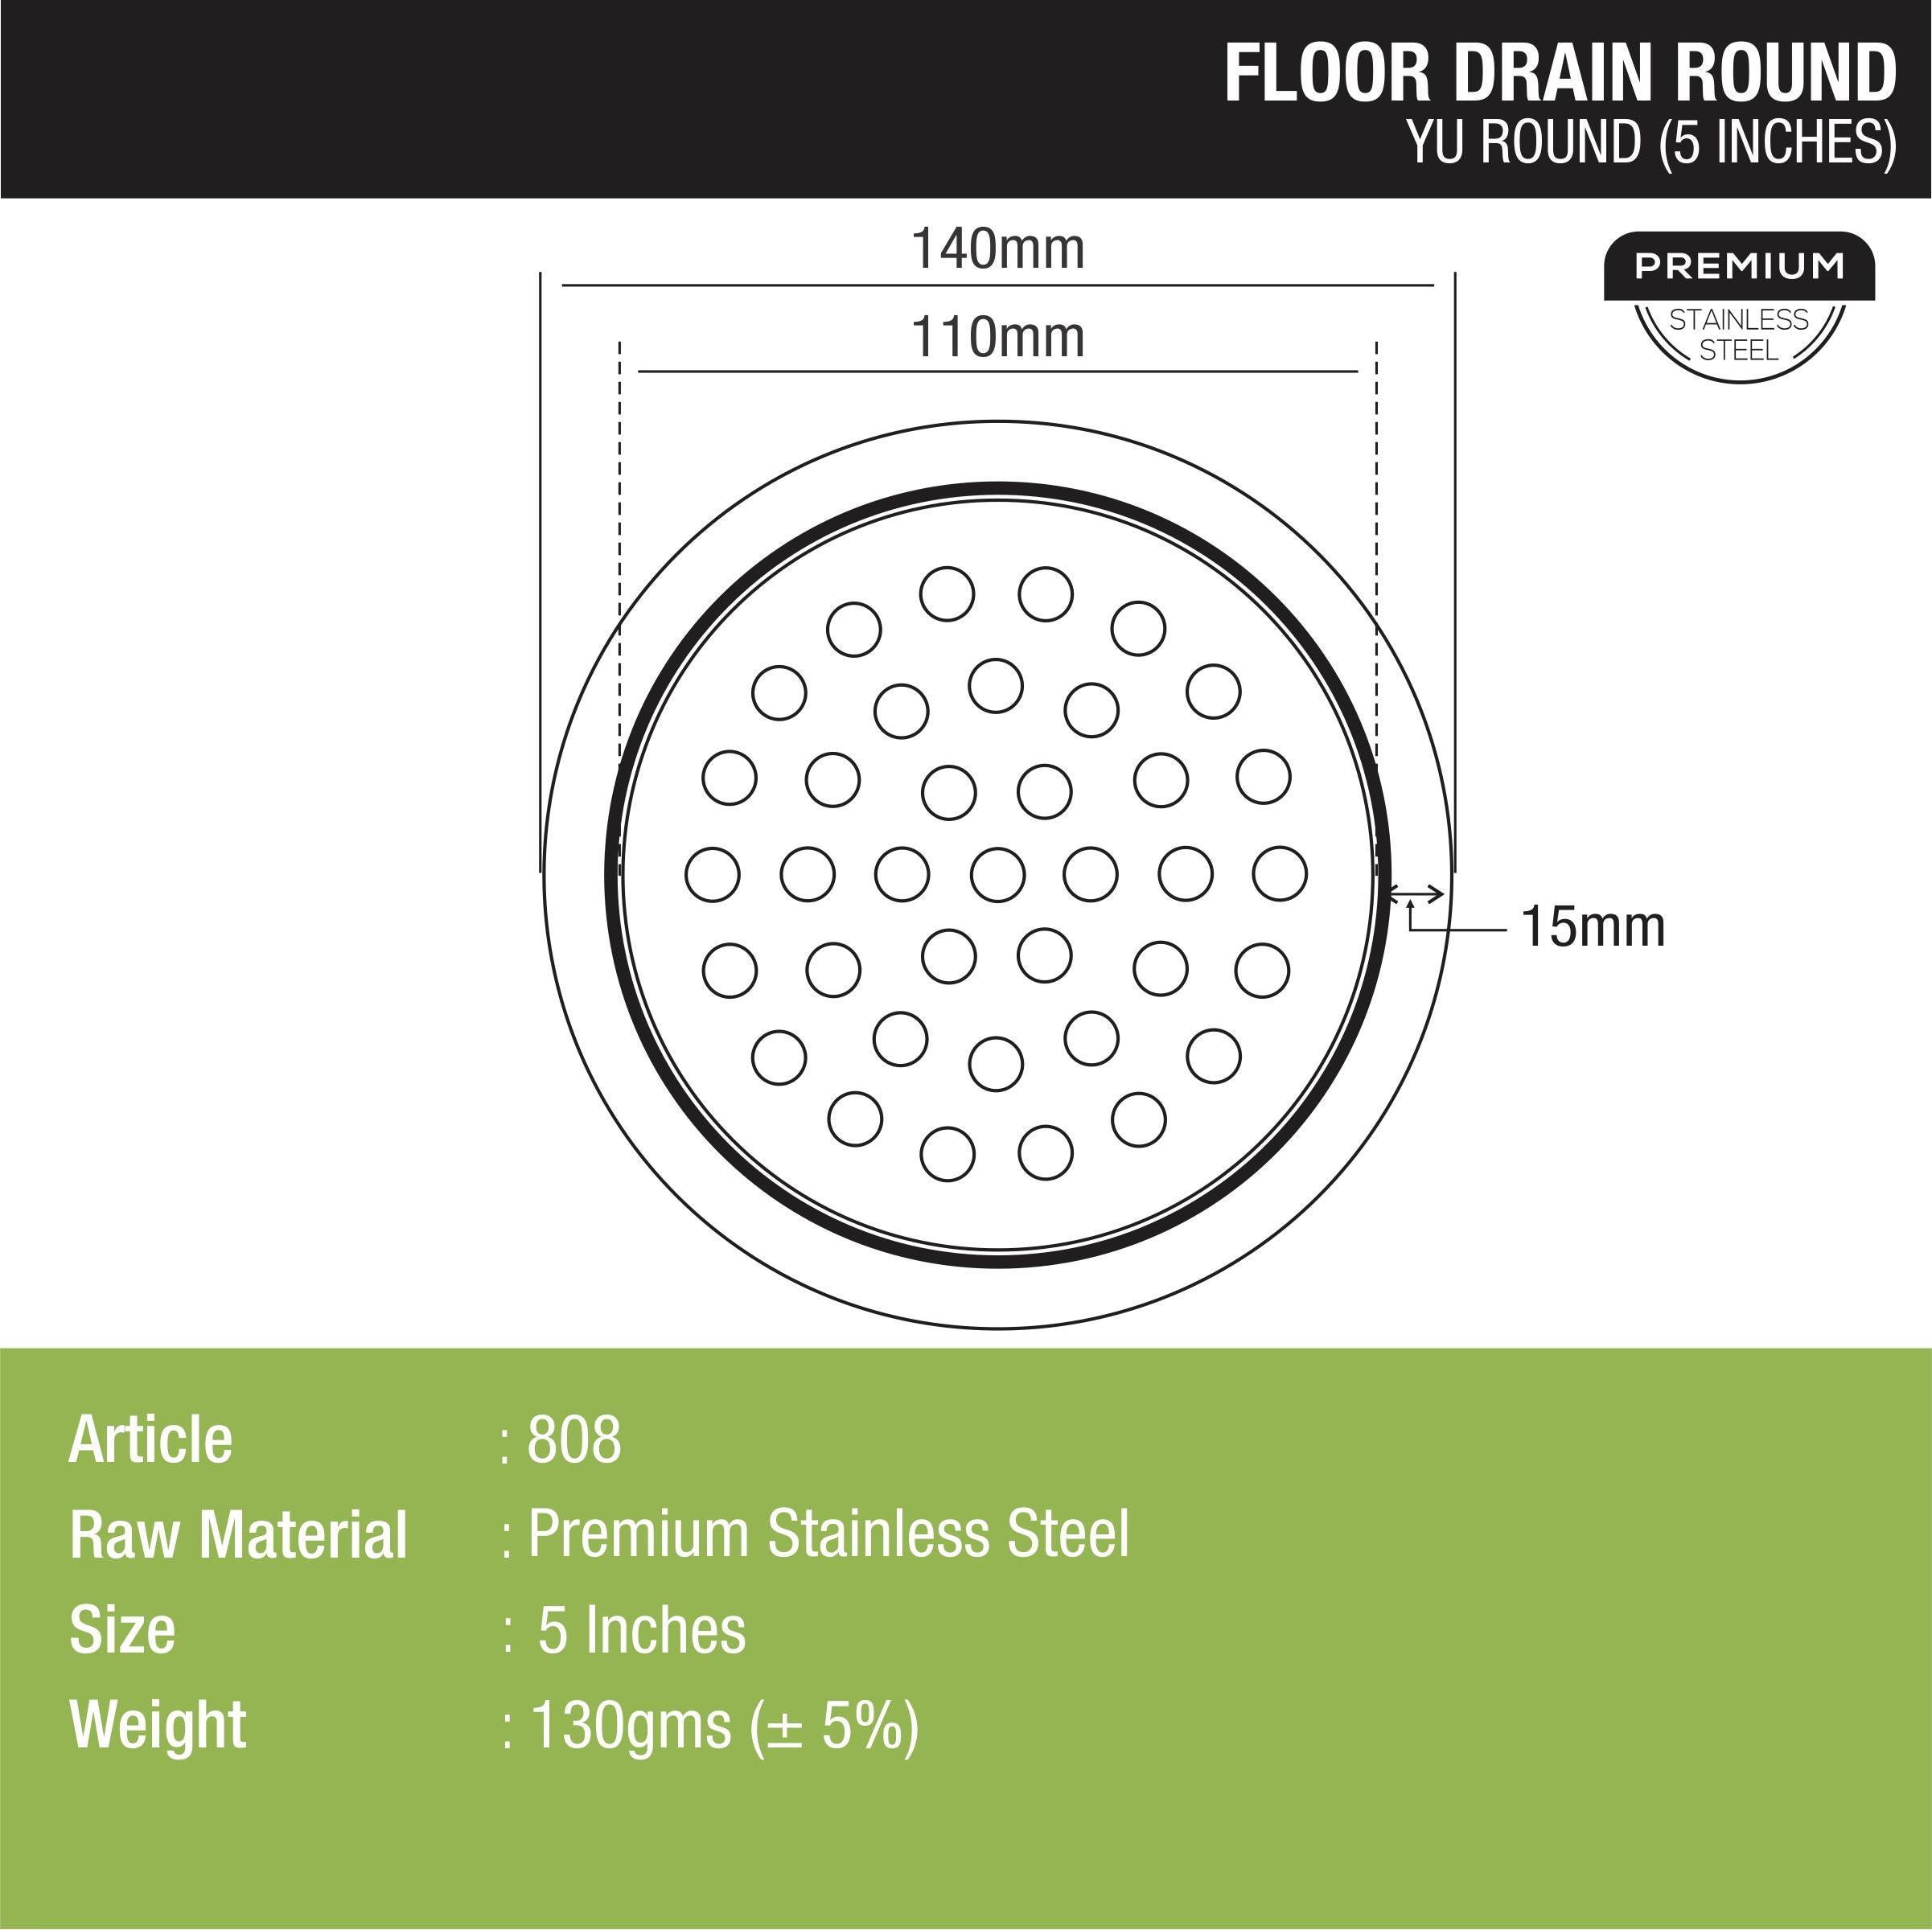 YU Round Floor Drain (5 inches) features